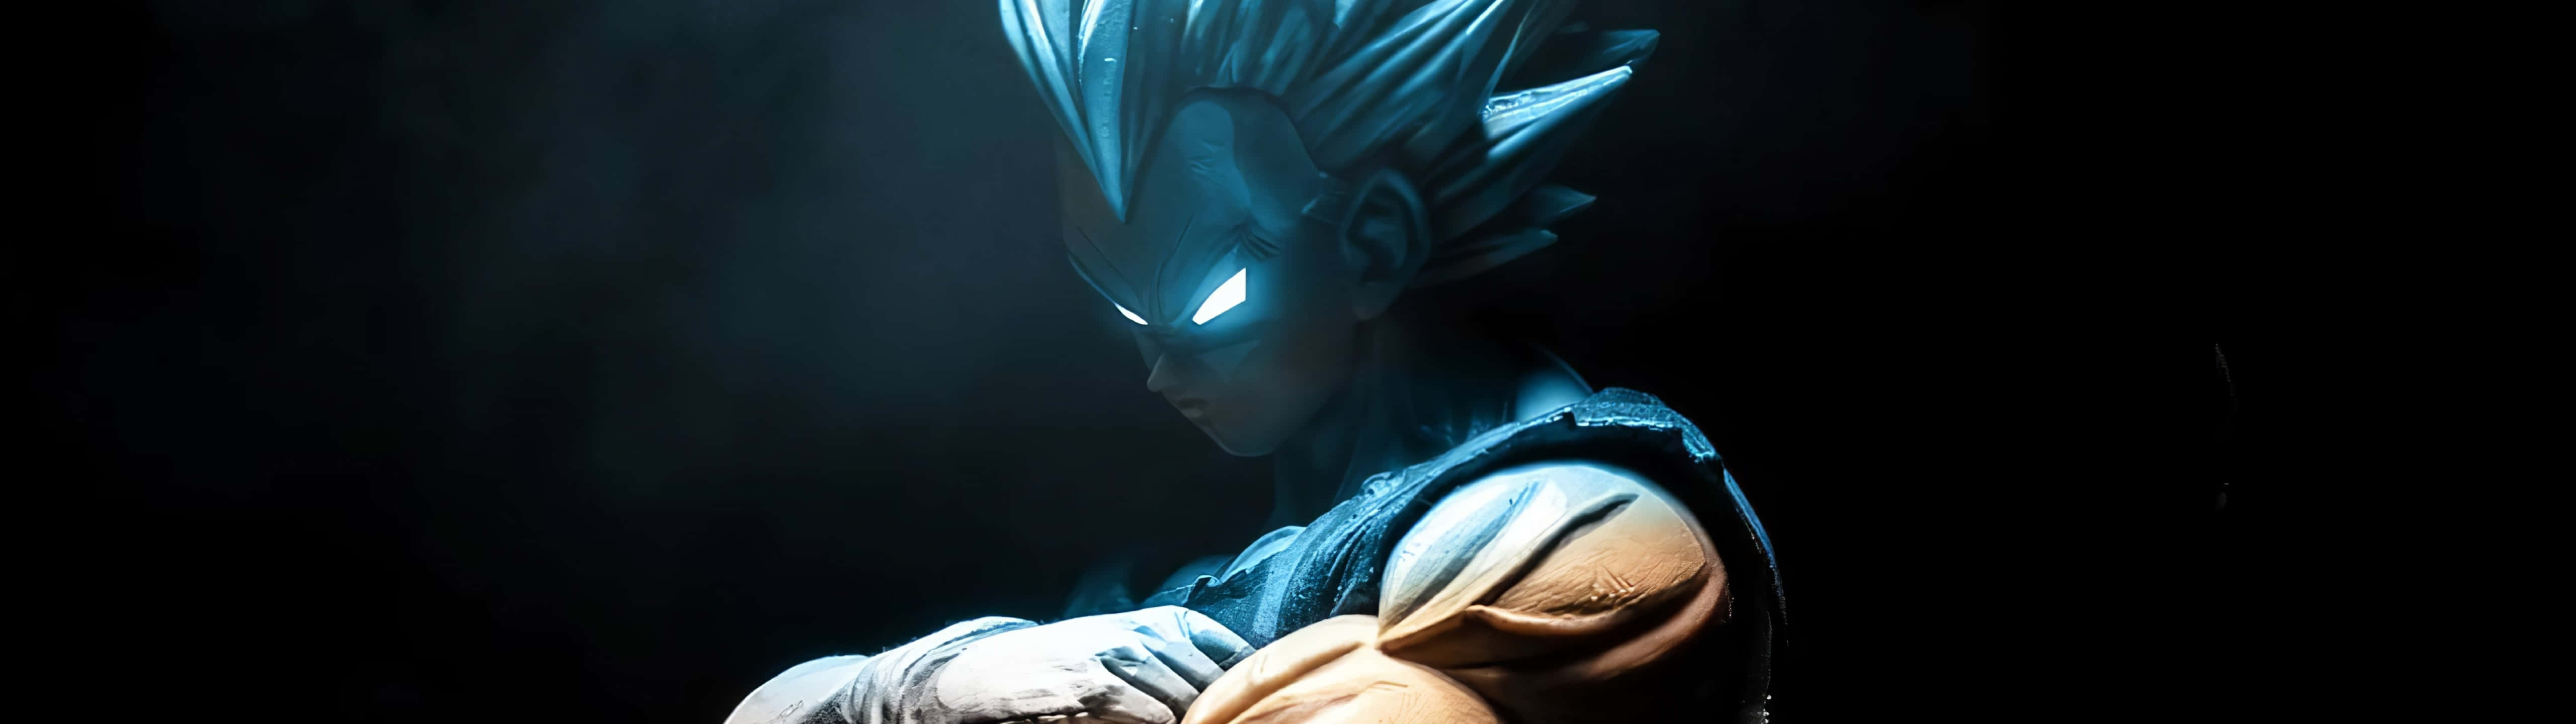 Popular Dragon Ball Z Characters- Get To Know Cool Vegeta Wallpaper